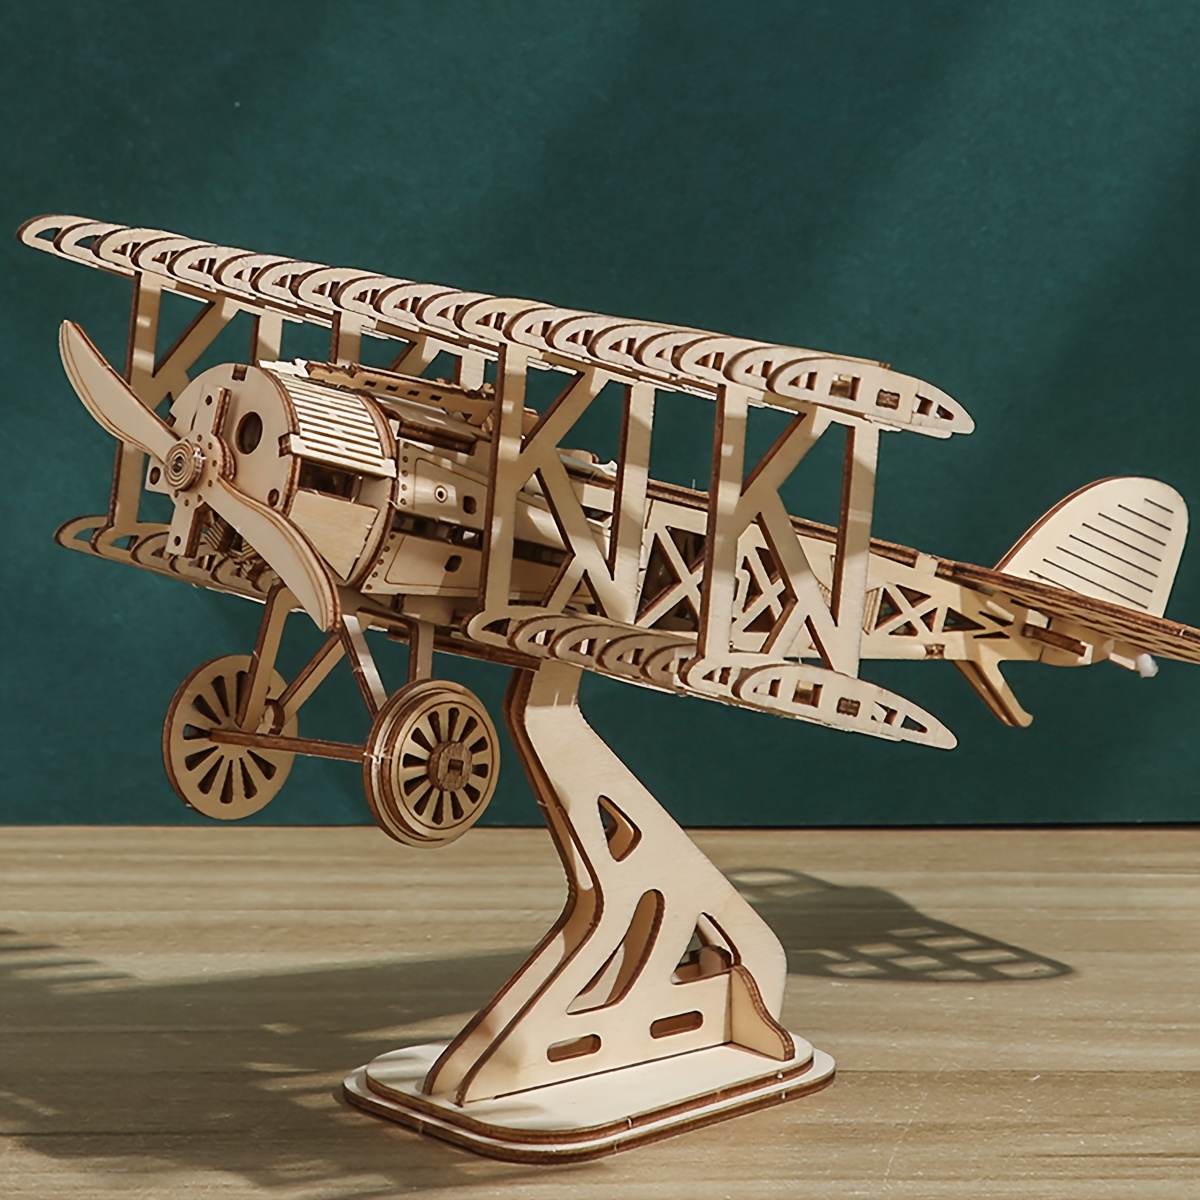 

3d Wooden Puzzle Wood Diy Craft Bi-plane Model Kits Handmade Gifts Christmas Gifts